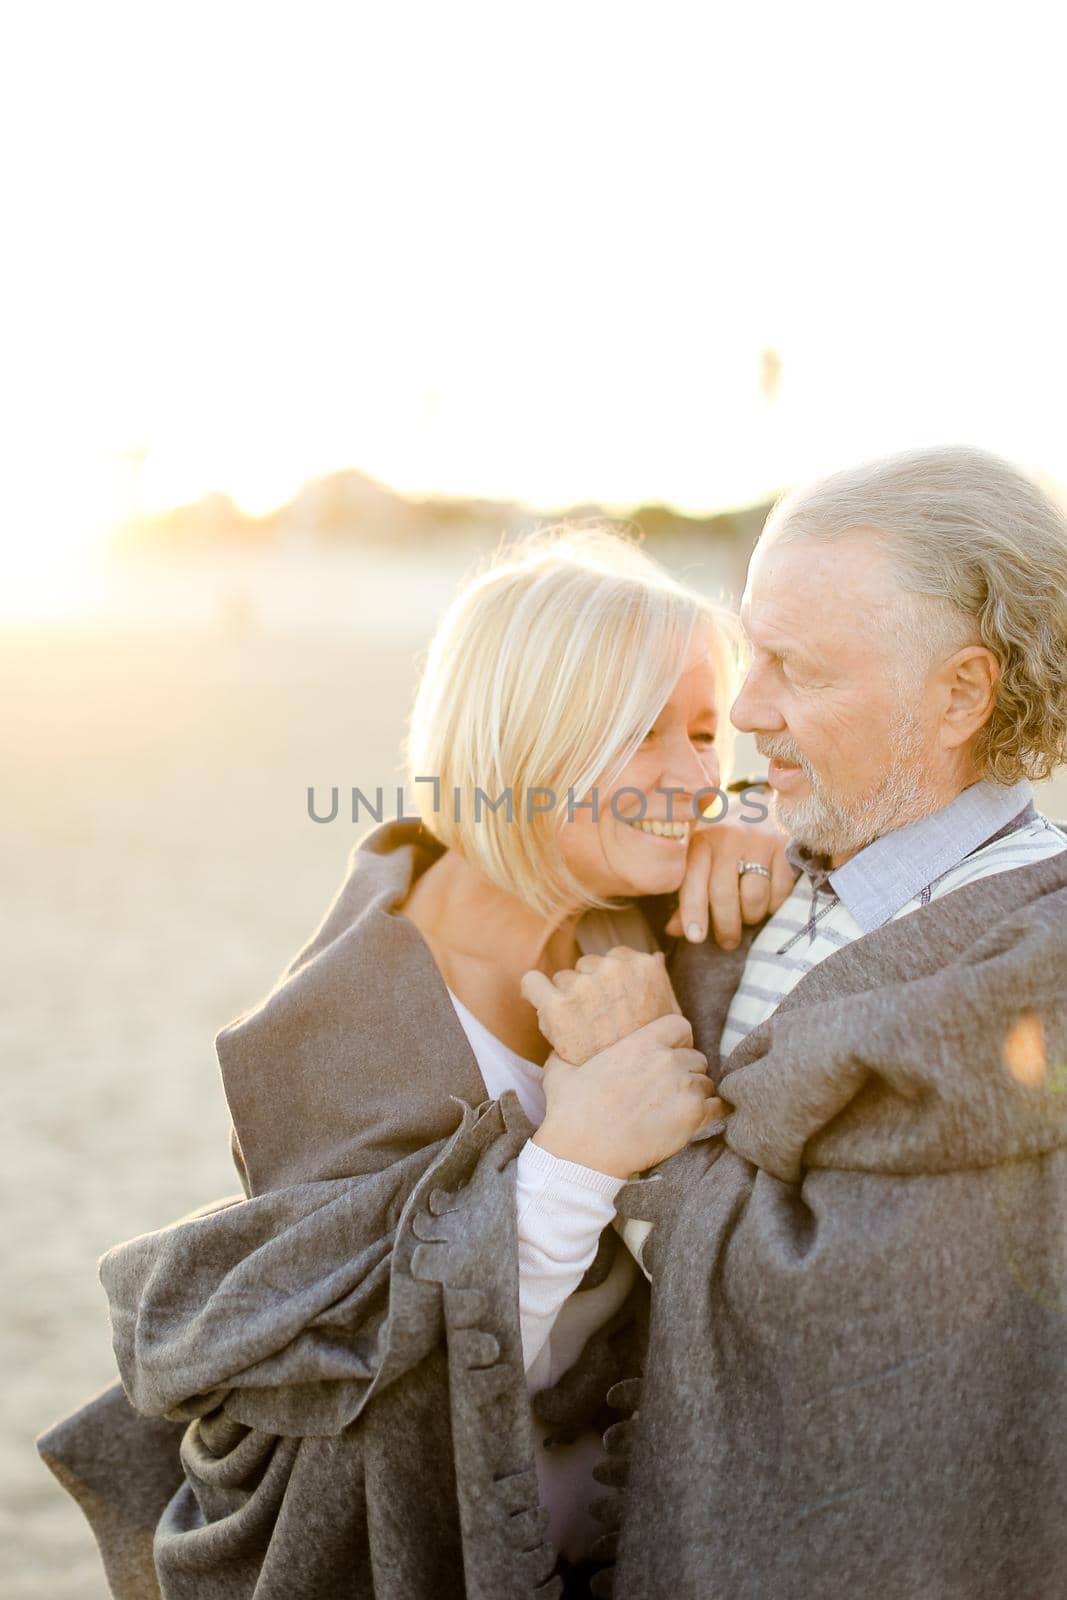 Sunshine photo of senior husband hugging blonde wife wearing plaid on sand beach. Concept of happy elderly couple and relationship.